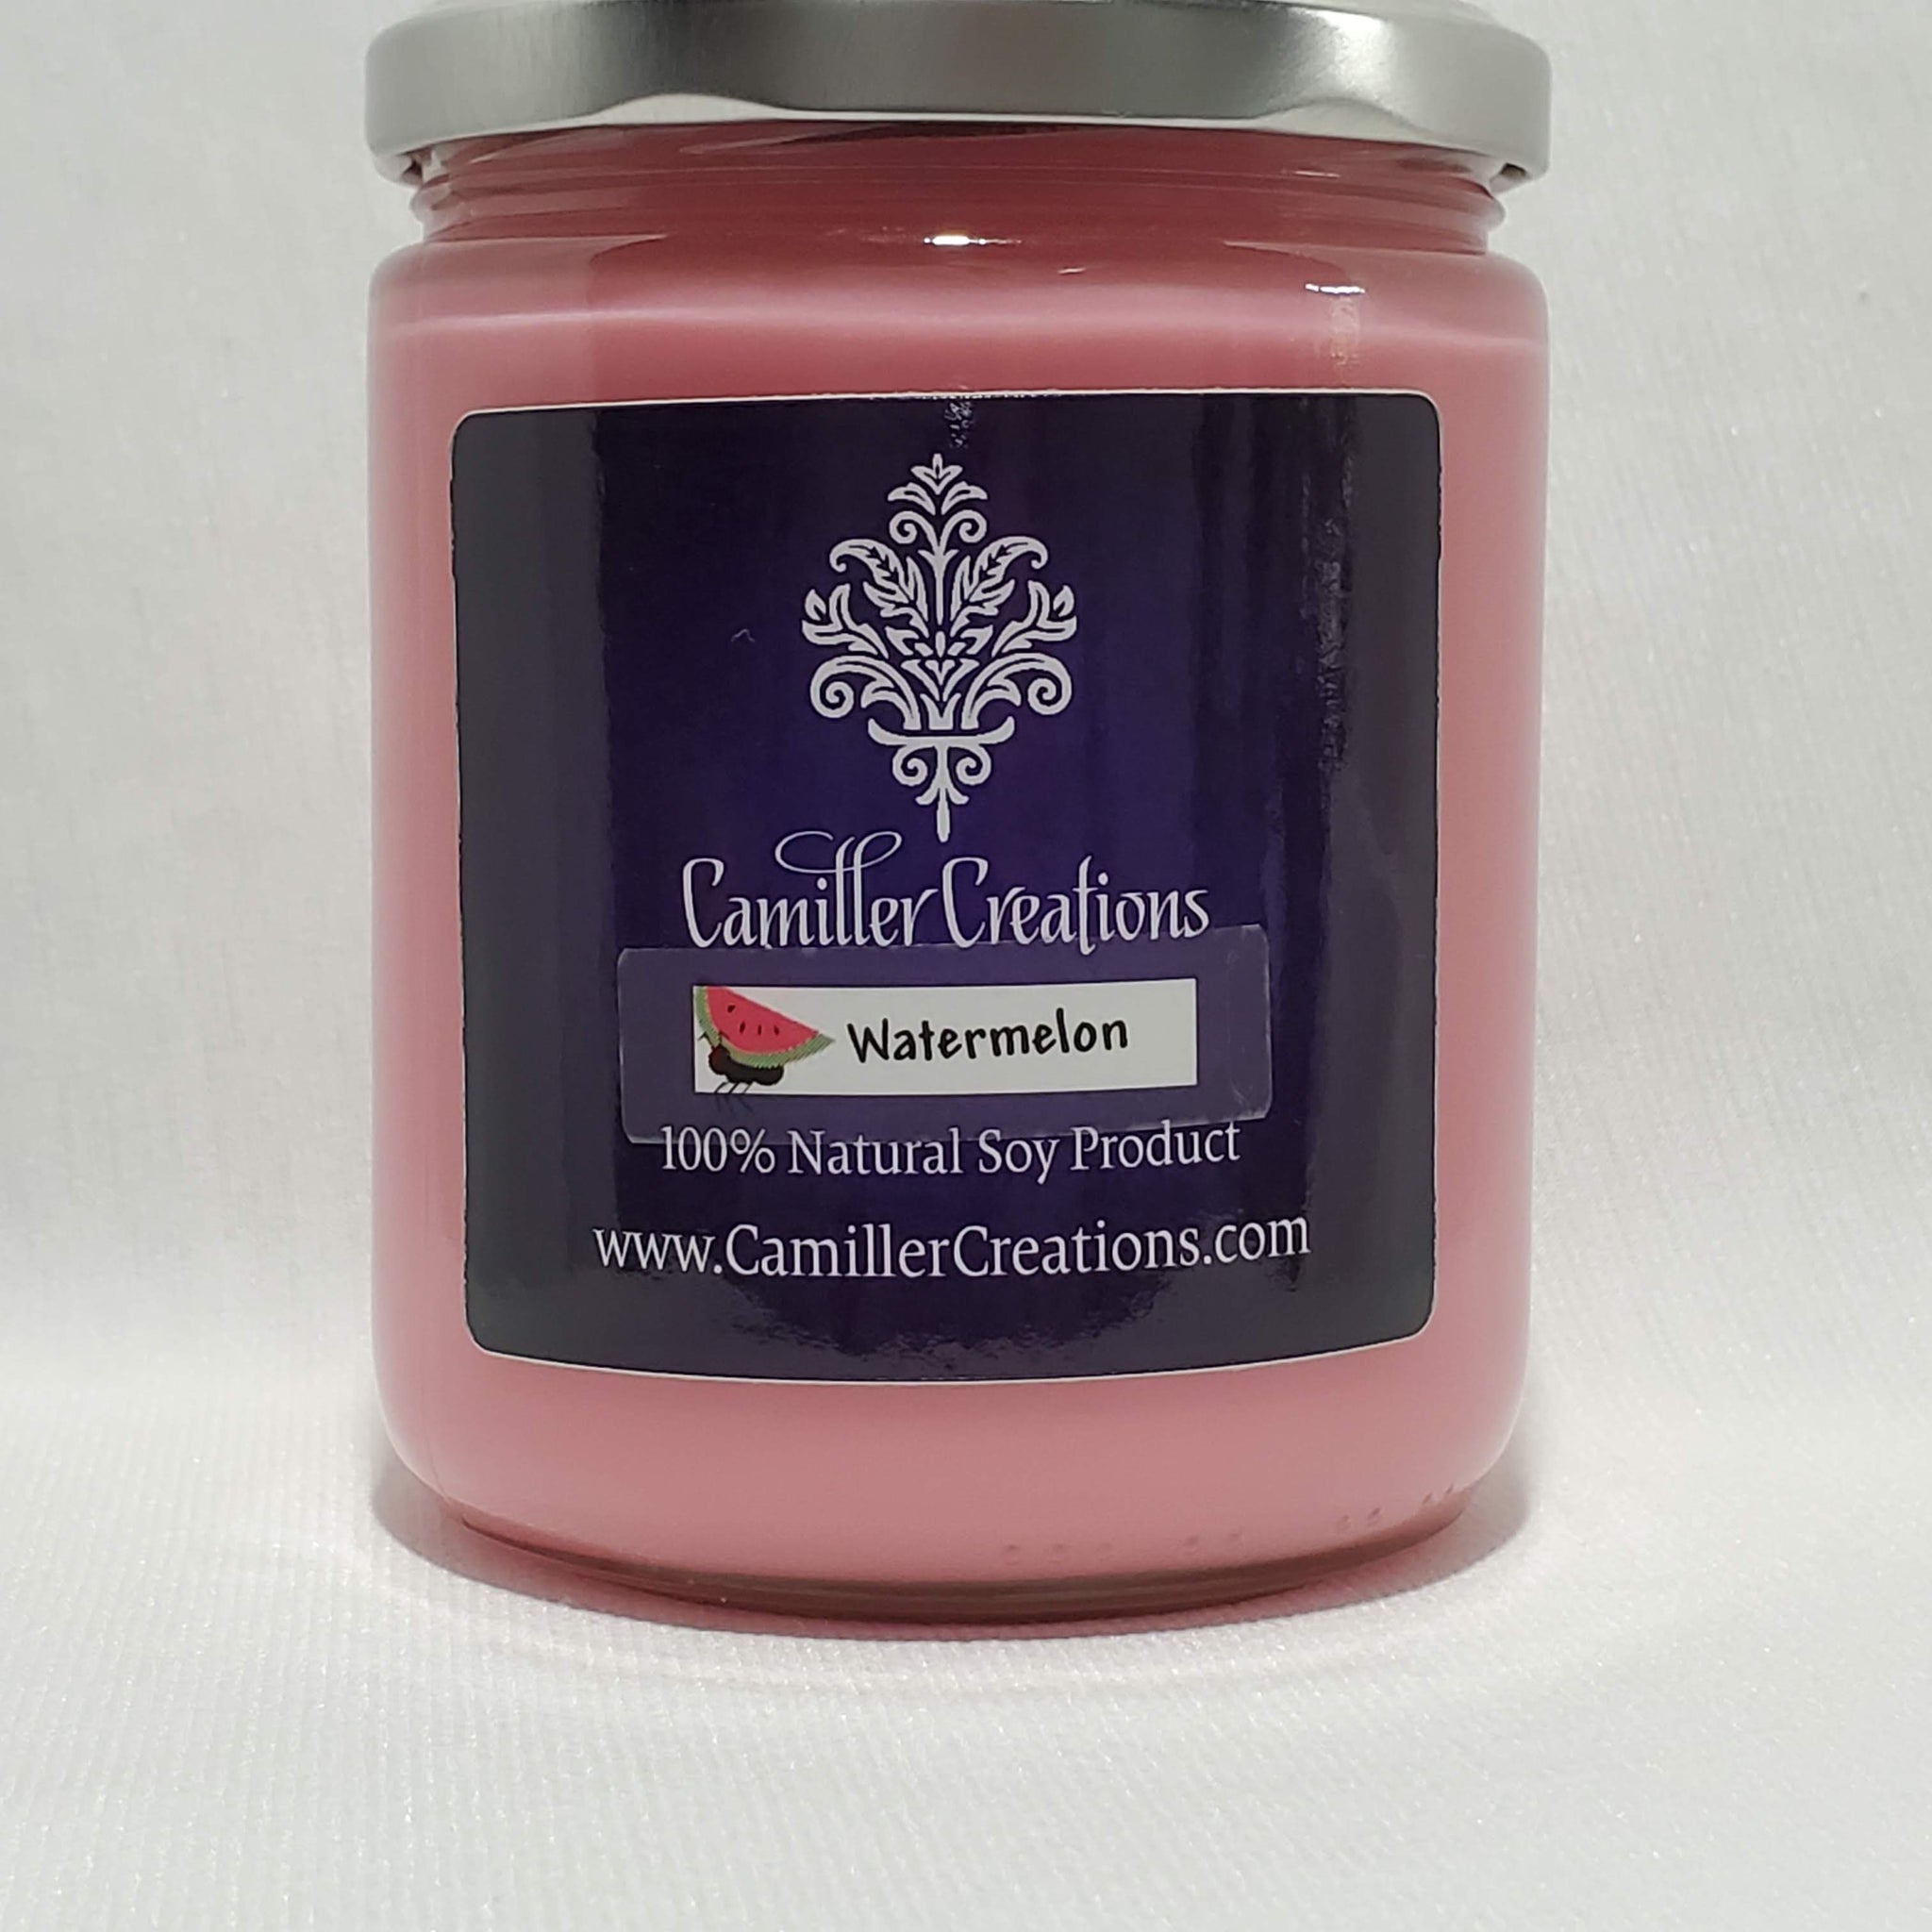 Watermelon Candle